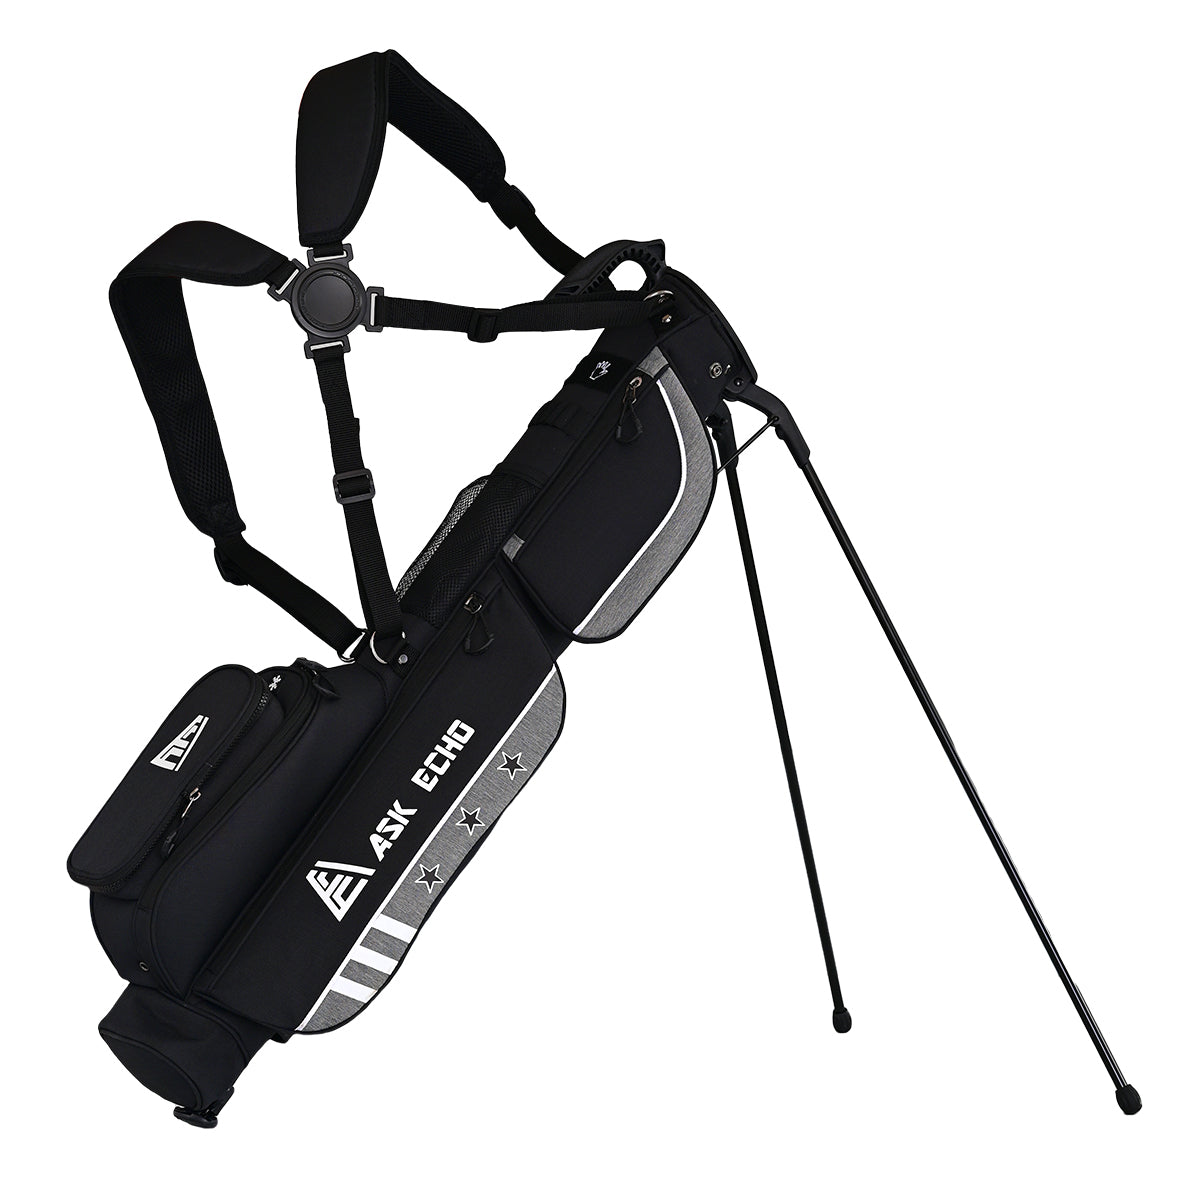 Askecho Golf Sunday Bag Holds Up To 12 Clubs Enjoy Par 3 With Weekend 2.0 / Olive Green